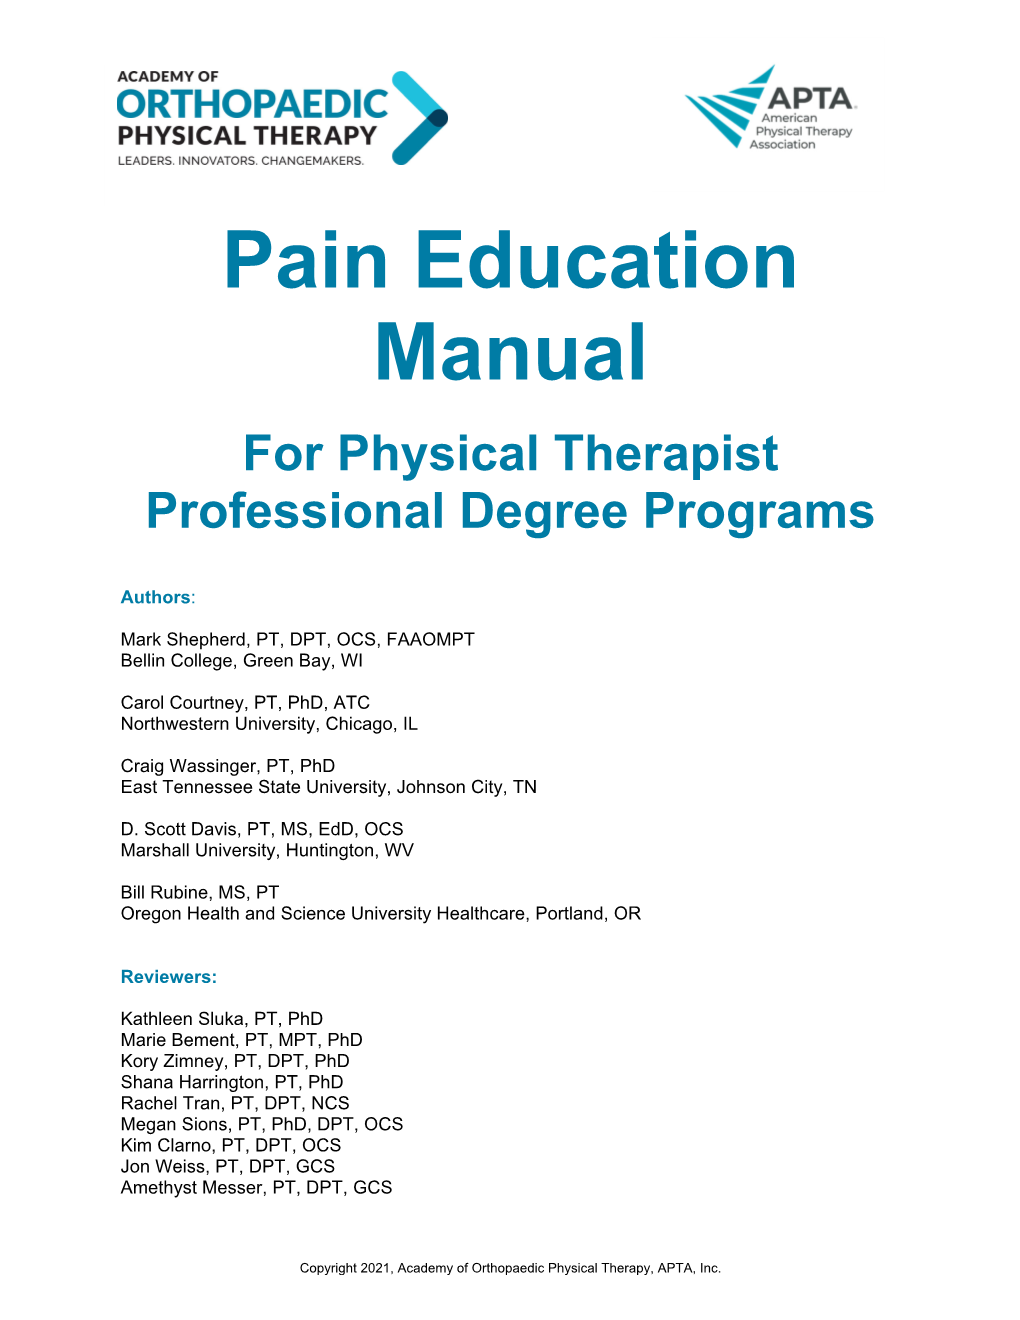 Pain Education Manual for Physical Therapist Professional Degree Programs